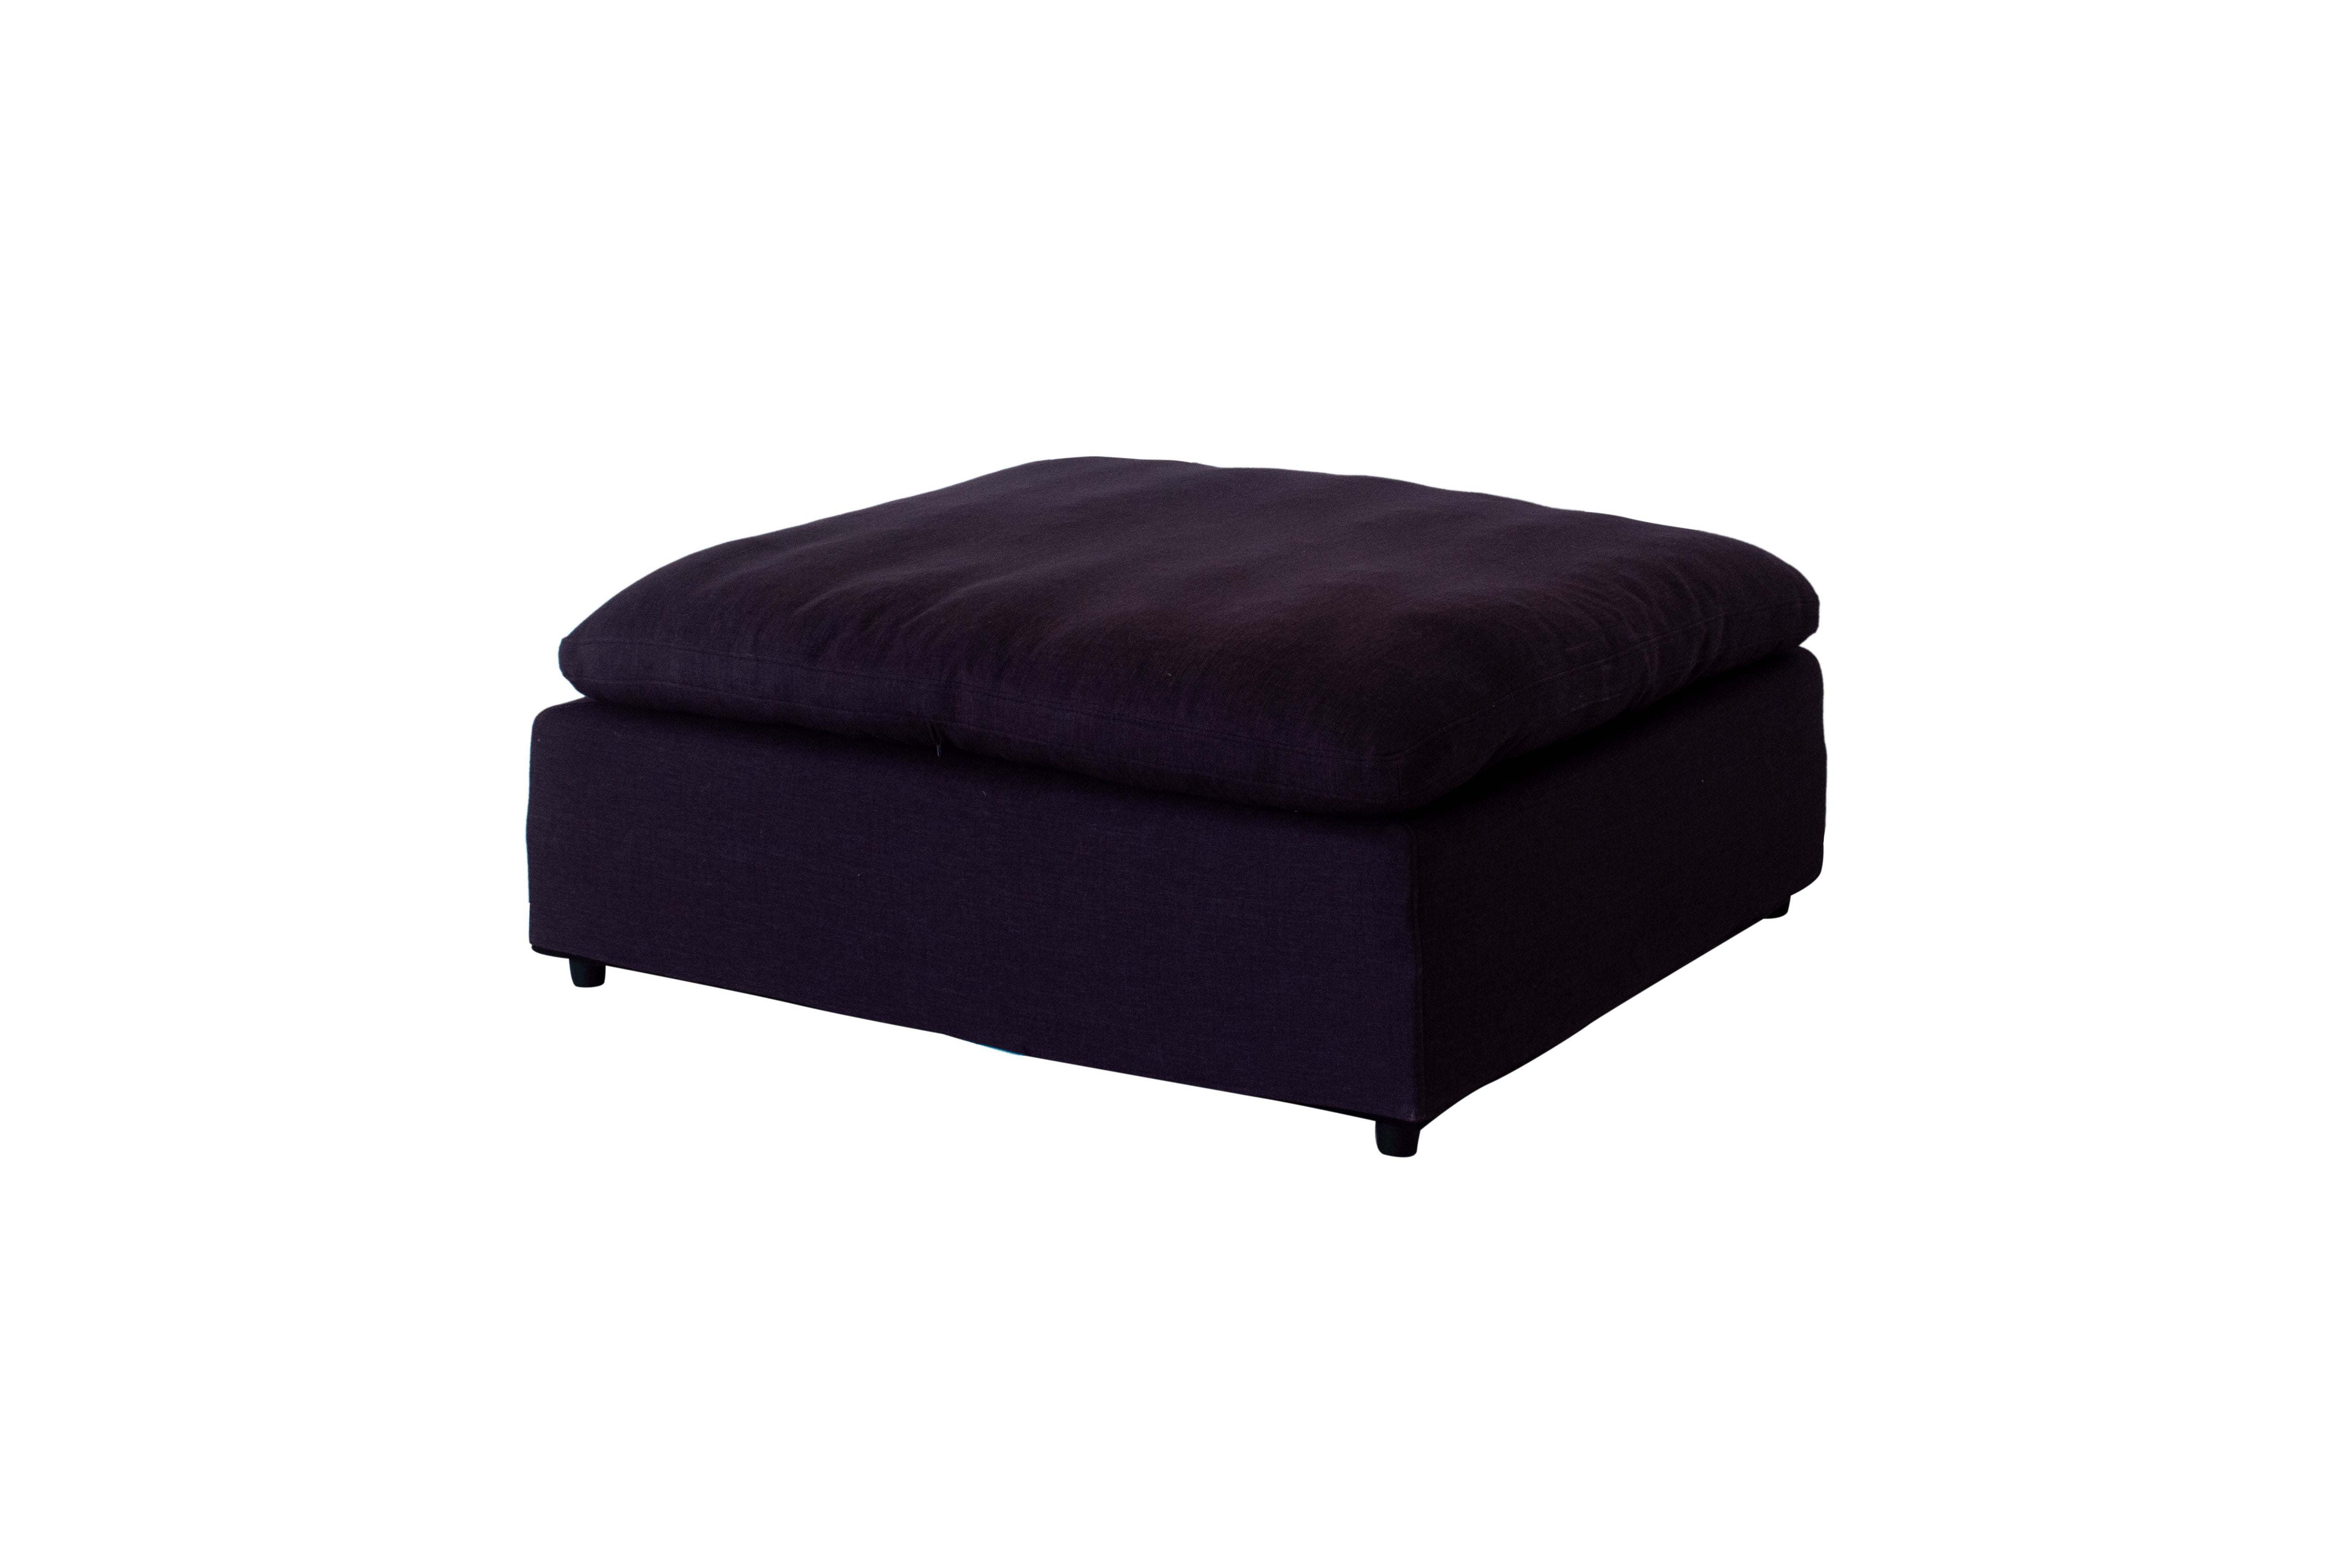 Modern 17" Luxe Size Ottoman, Premium Fabric Upholstered Living Room Cube Ottoman With Plush Seat Cushion, Navy